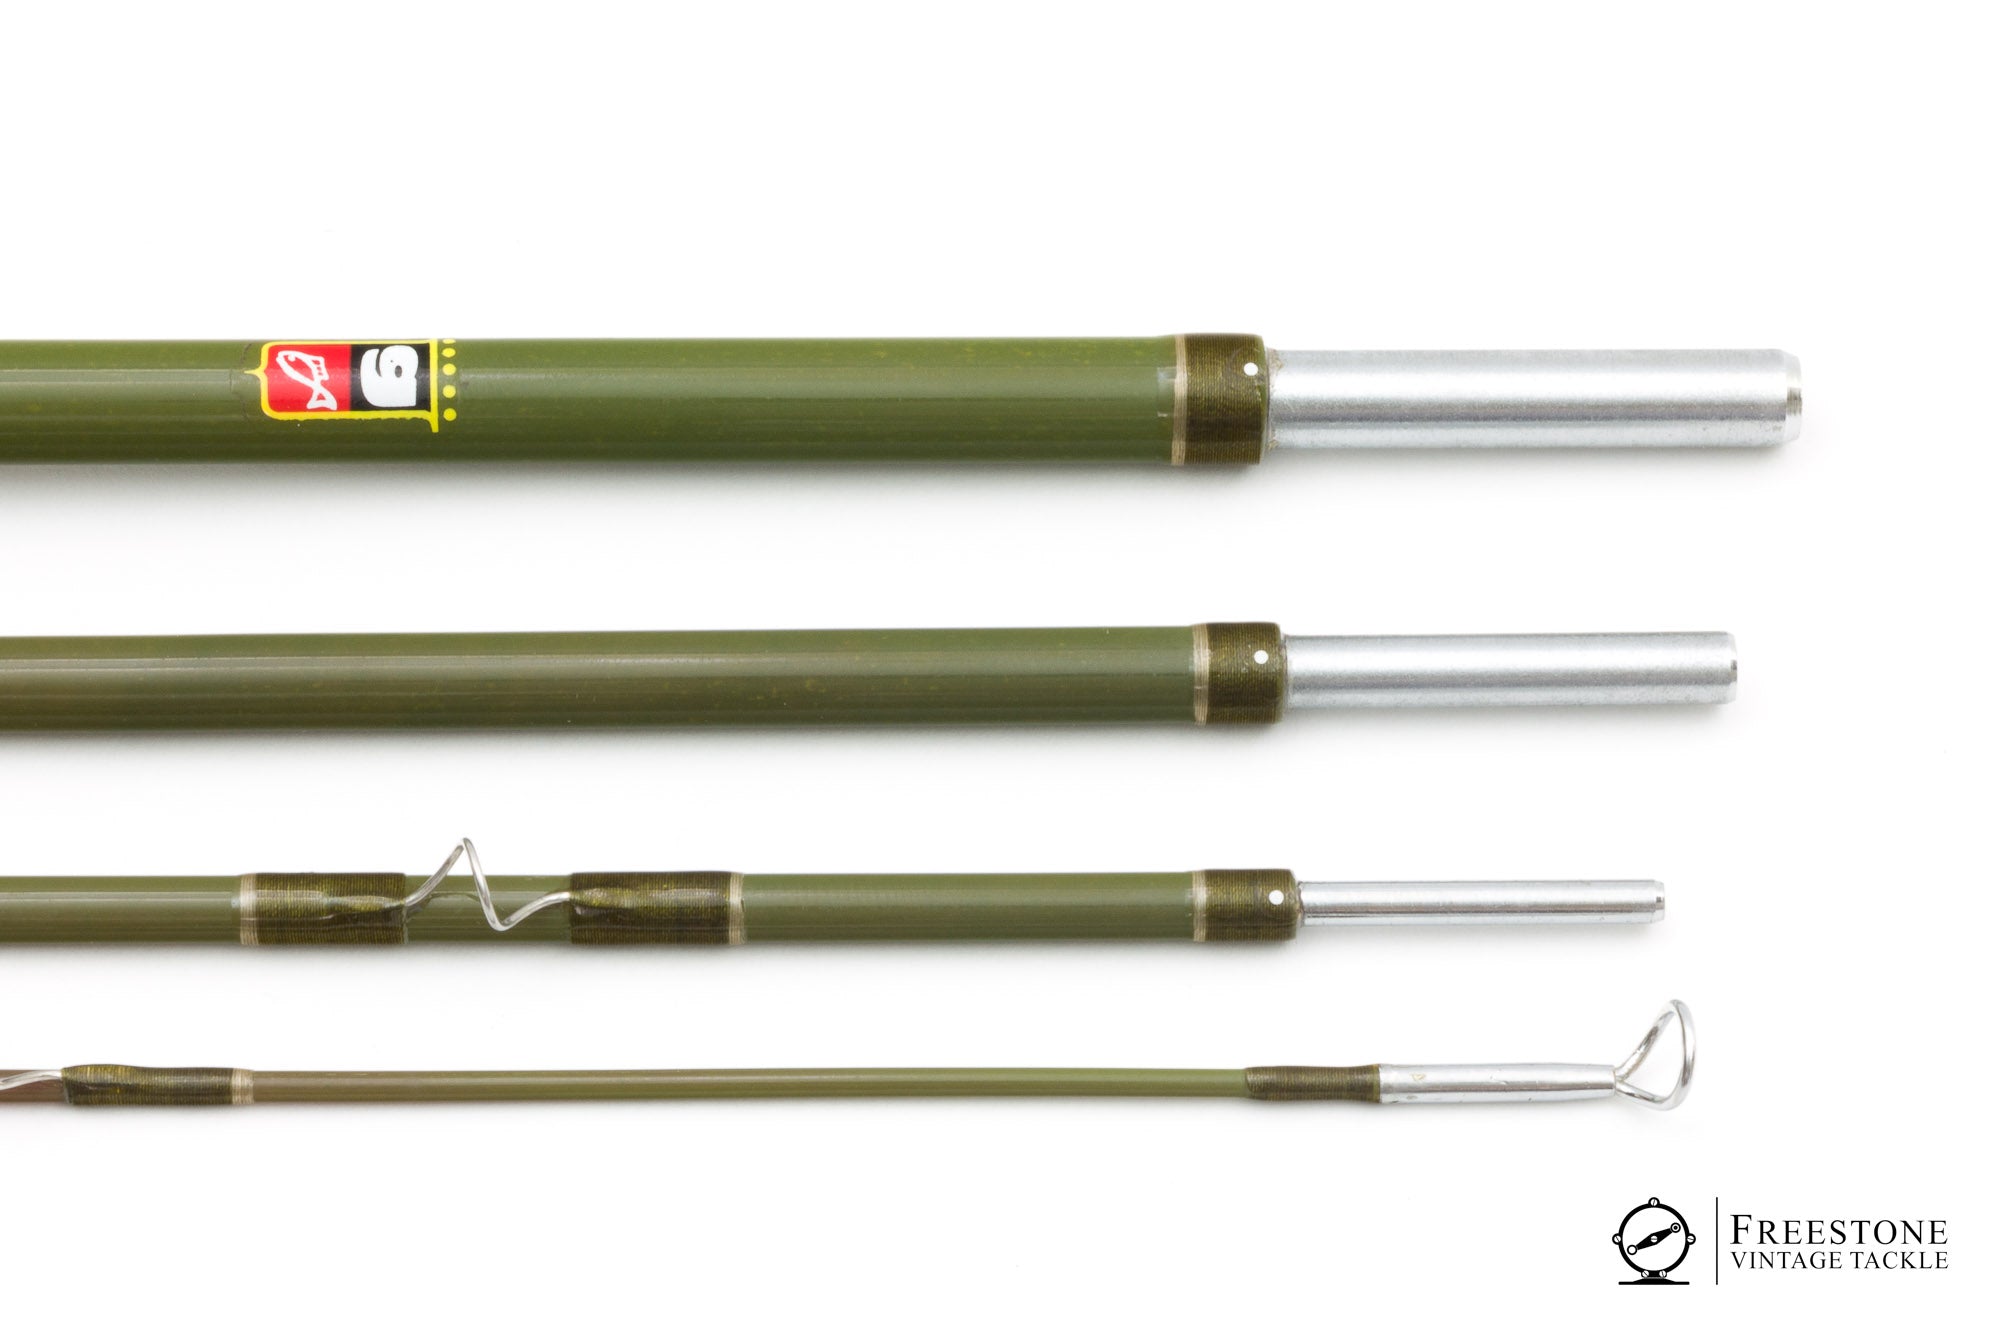 SET OF 4 GARCIA CONOLON CONVENTIONAL FISHING RODS, PRE-OWNED - Berinson  Tackle Company